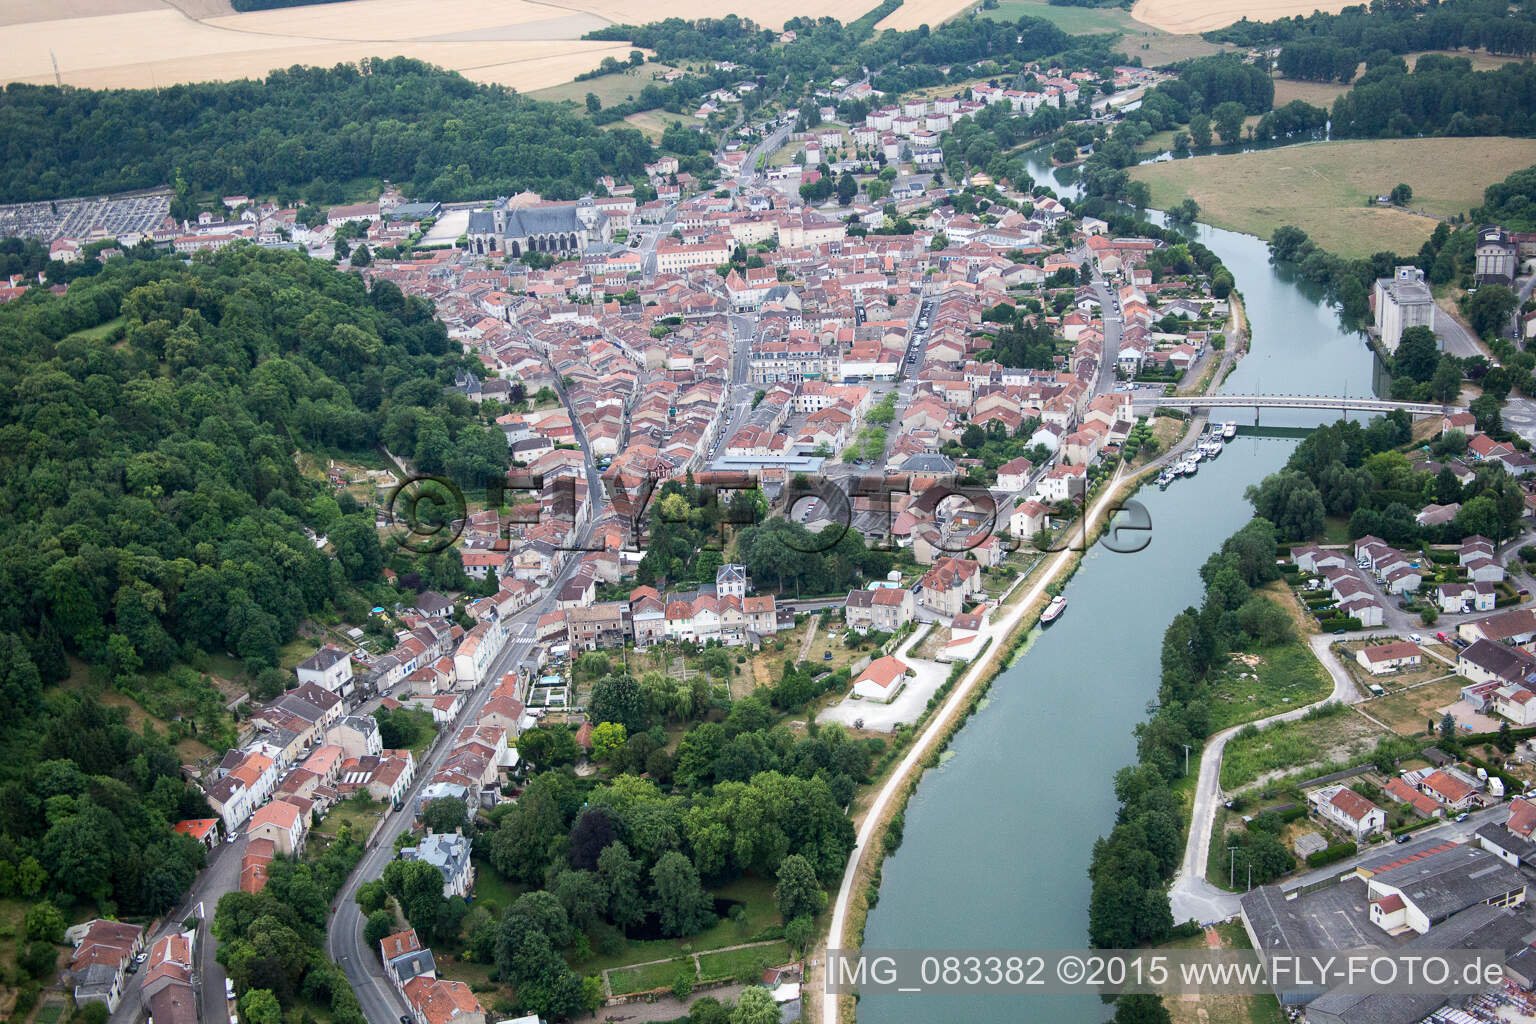 Oblique view of Village on the river bank areas der Meuse in Saint-Mihiel in Grand Est, France